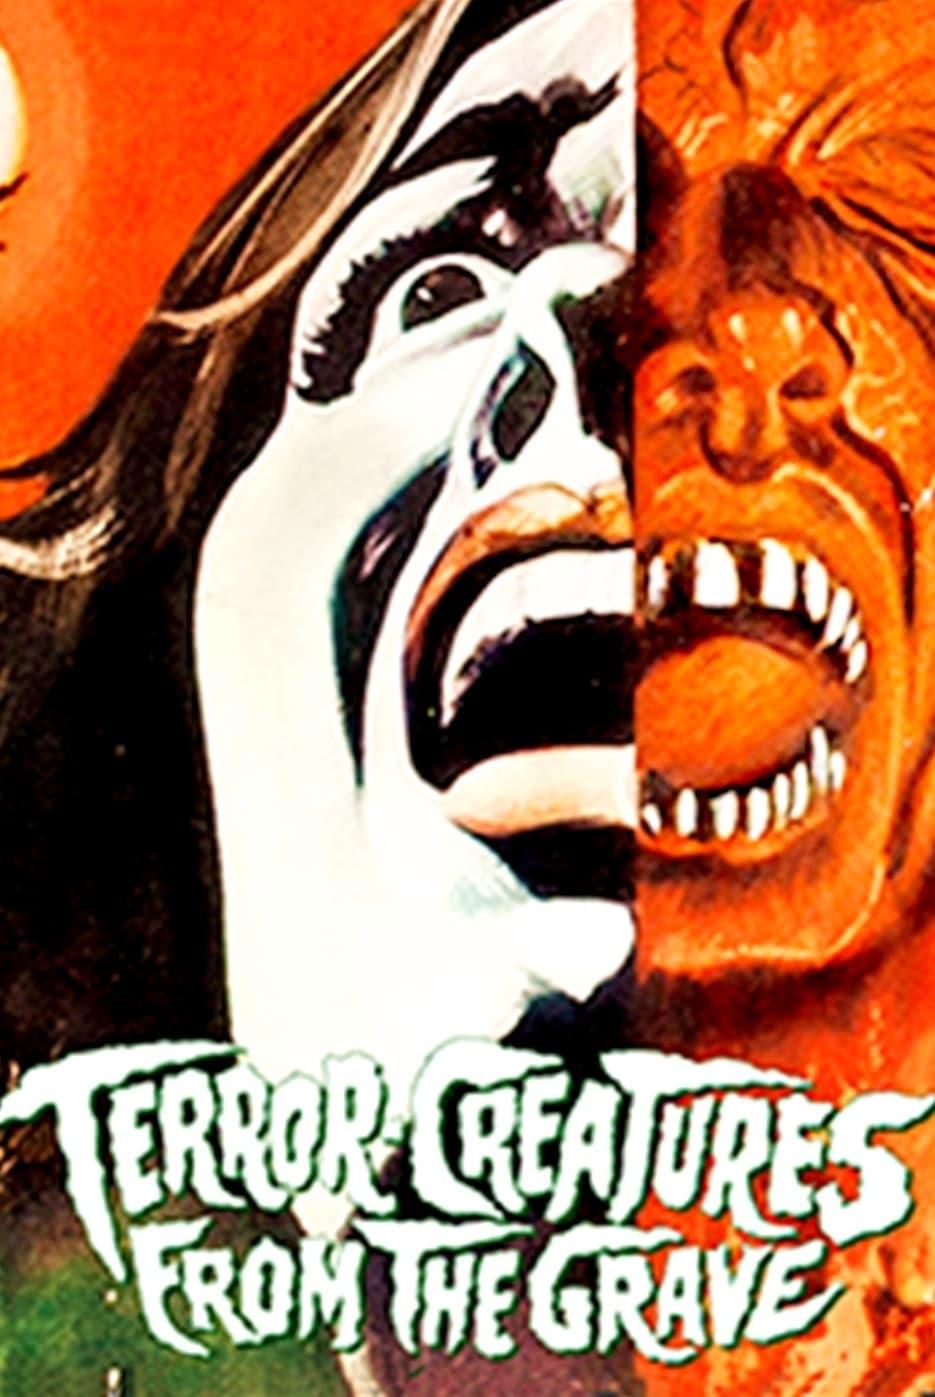 Terror-Creatures from the Grave poster